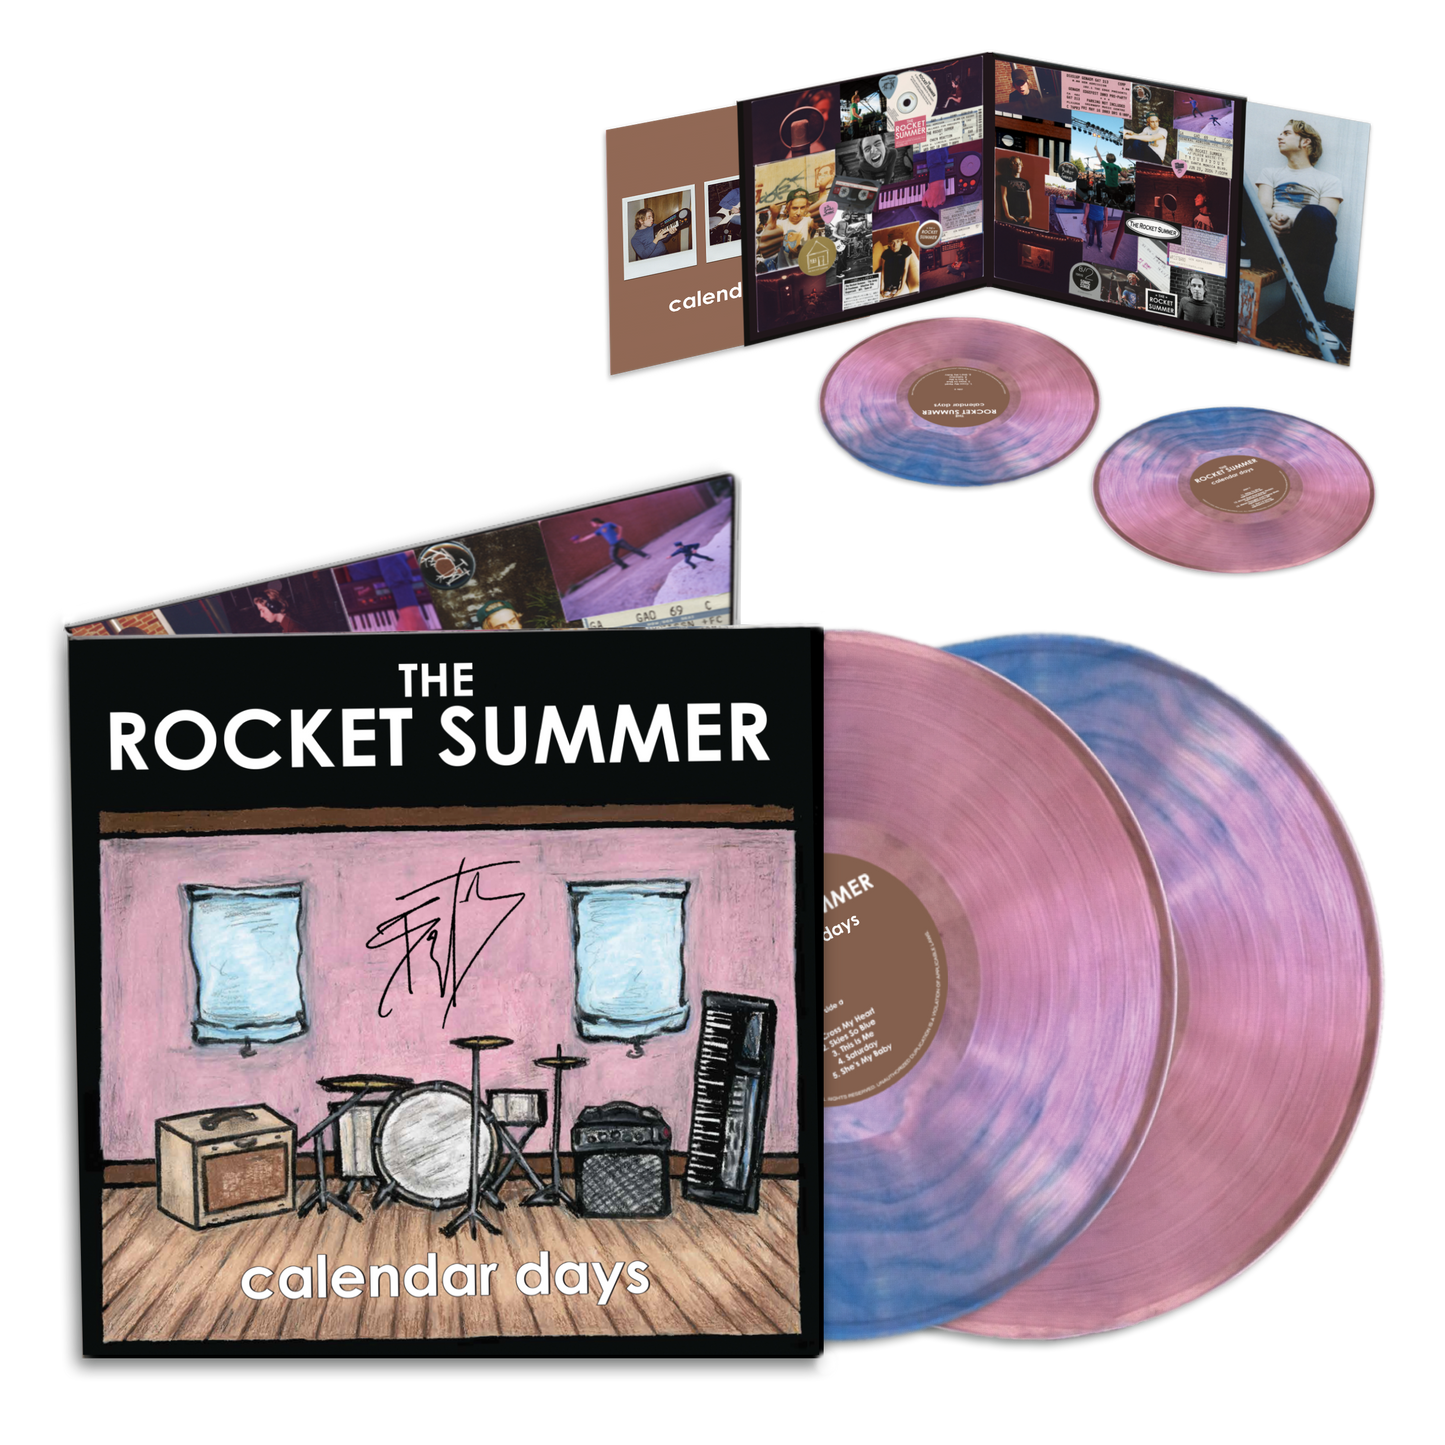 SIGNED calendar days - Deluxe Double Vinyl Anniversary Edition on TRANSLUCENT SKY BLUE & COTTON CANDY PINK MIX (Includes 7 additional recordings)